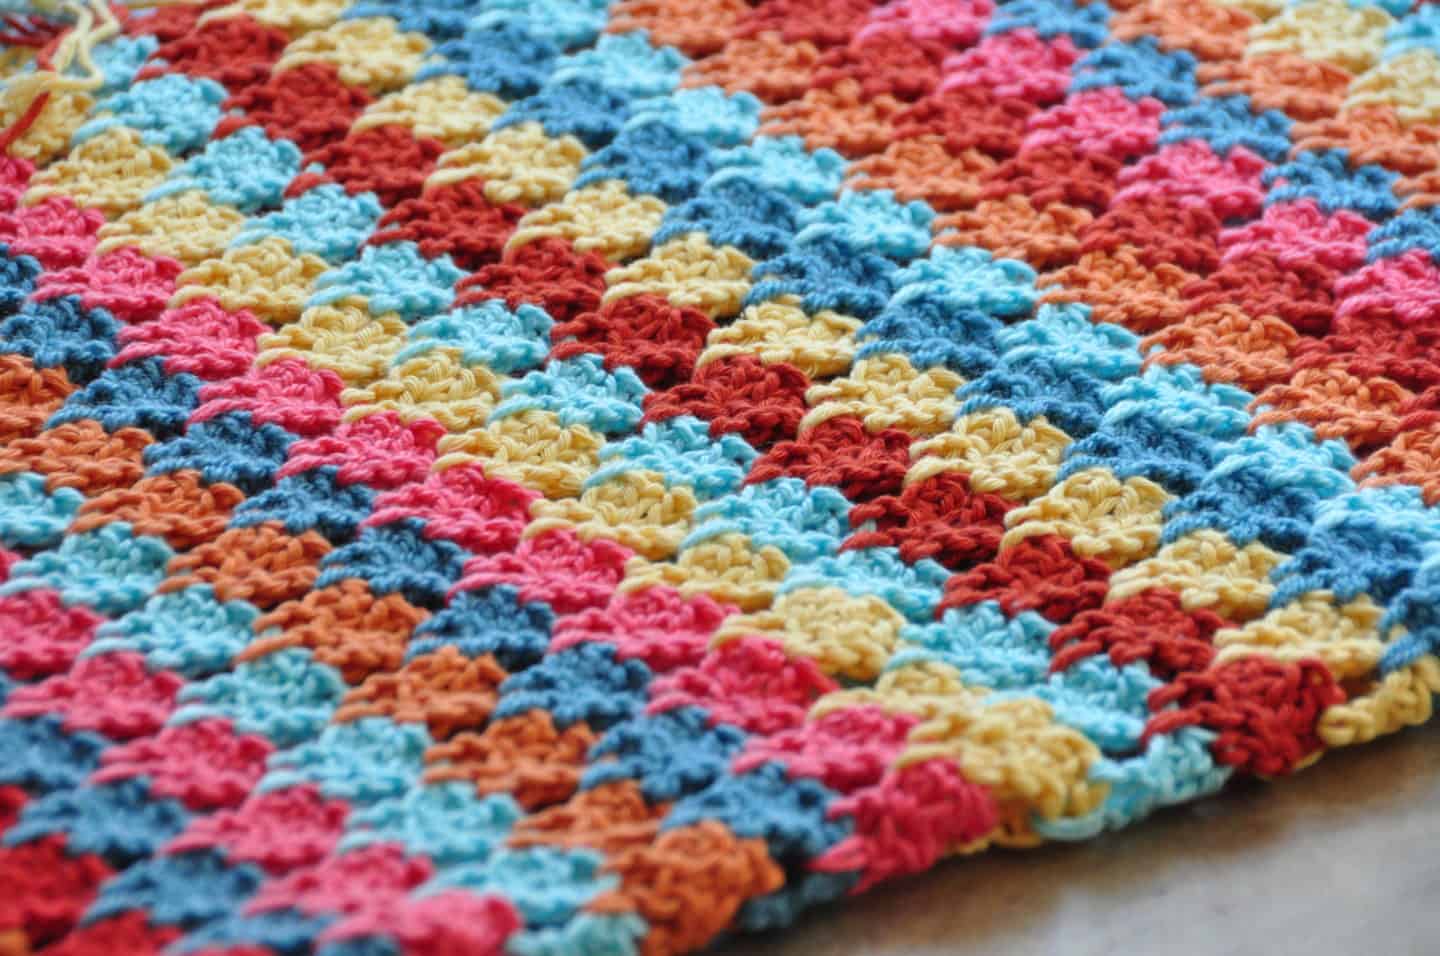 Tackle your yarn stash and learn how to crochet the larksfoot stitch with this beautiful and easy free crochet blanket pattern. With step by step photos and entire crochet pattern, the larksfoot makes the perfect baby blanket, home throw, scarf or garment that is great for a beginner.